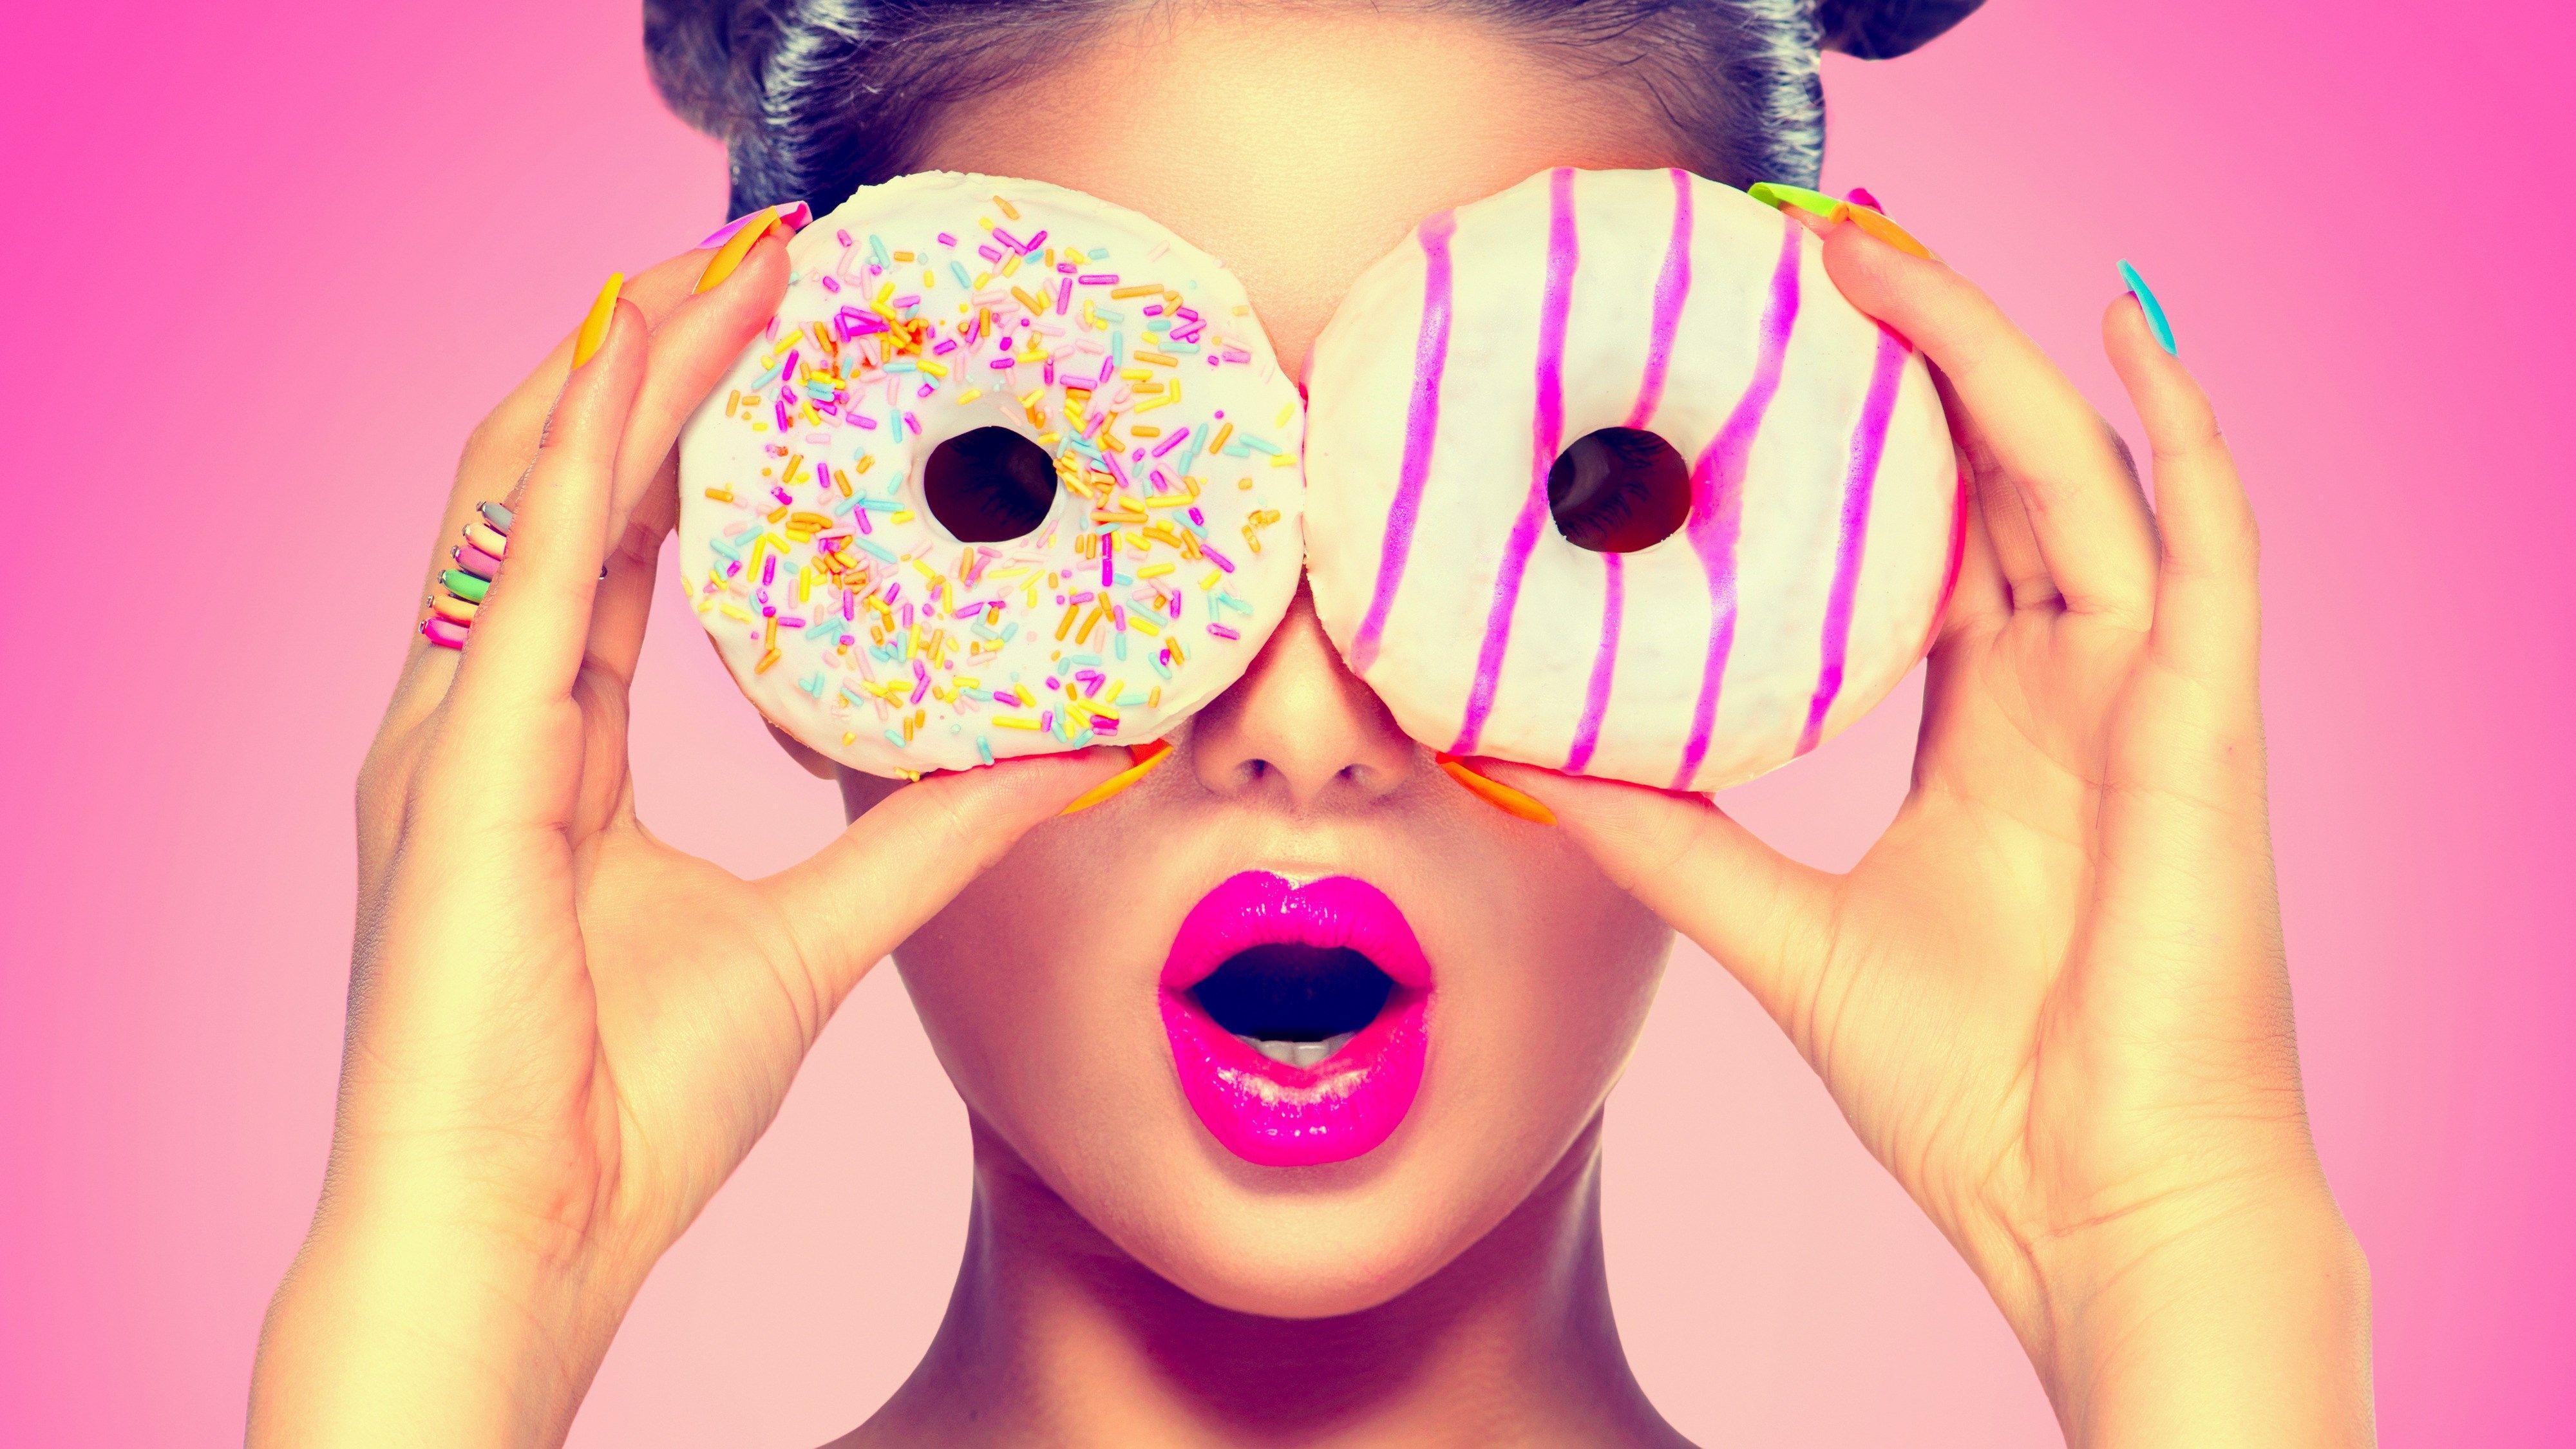 Pink Donut Wallpapers Top Free Pink Donut Backgrounds Wallpaperaccess 